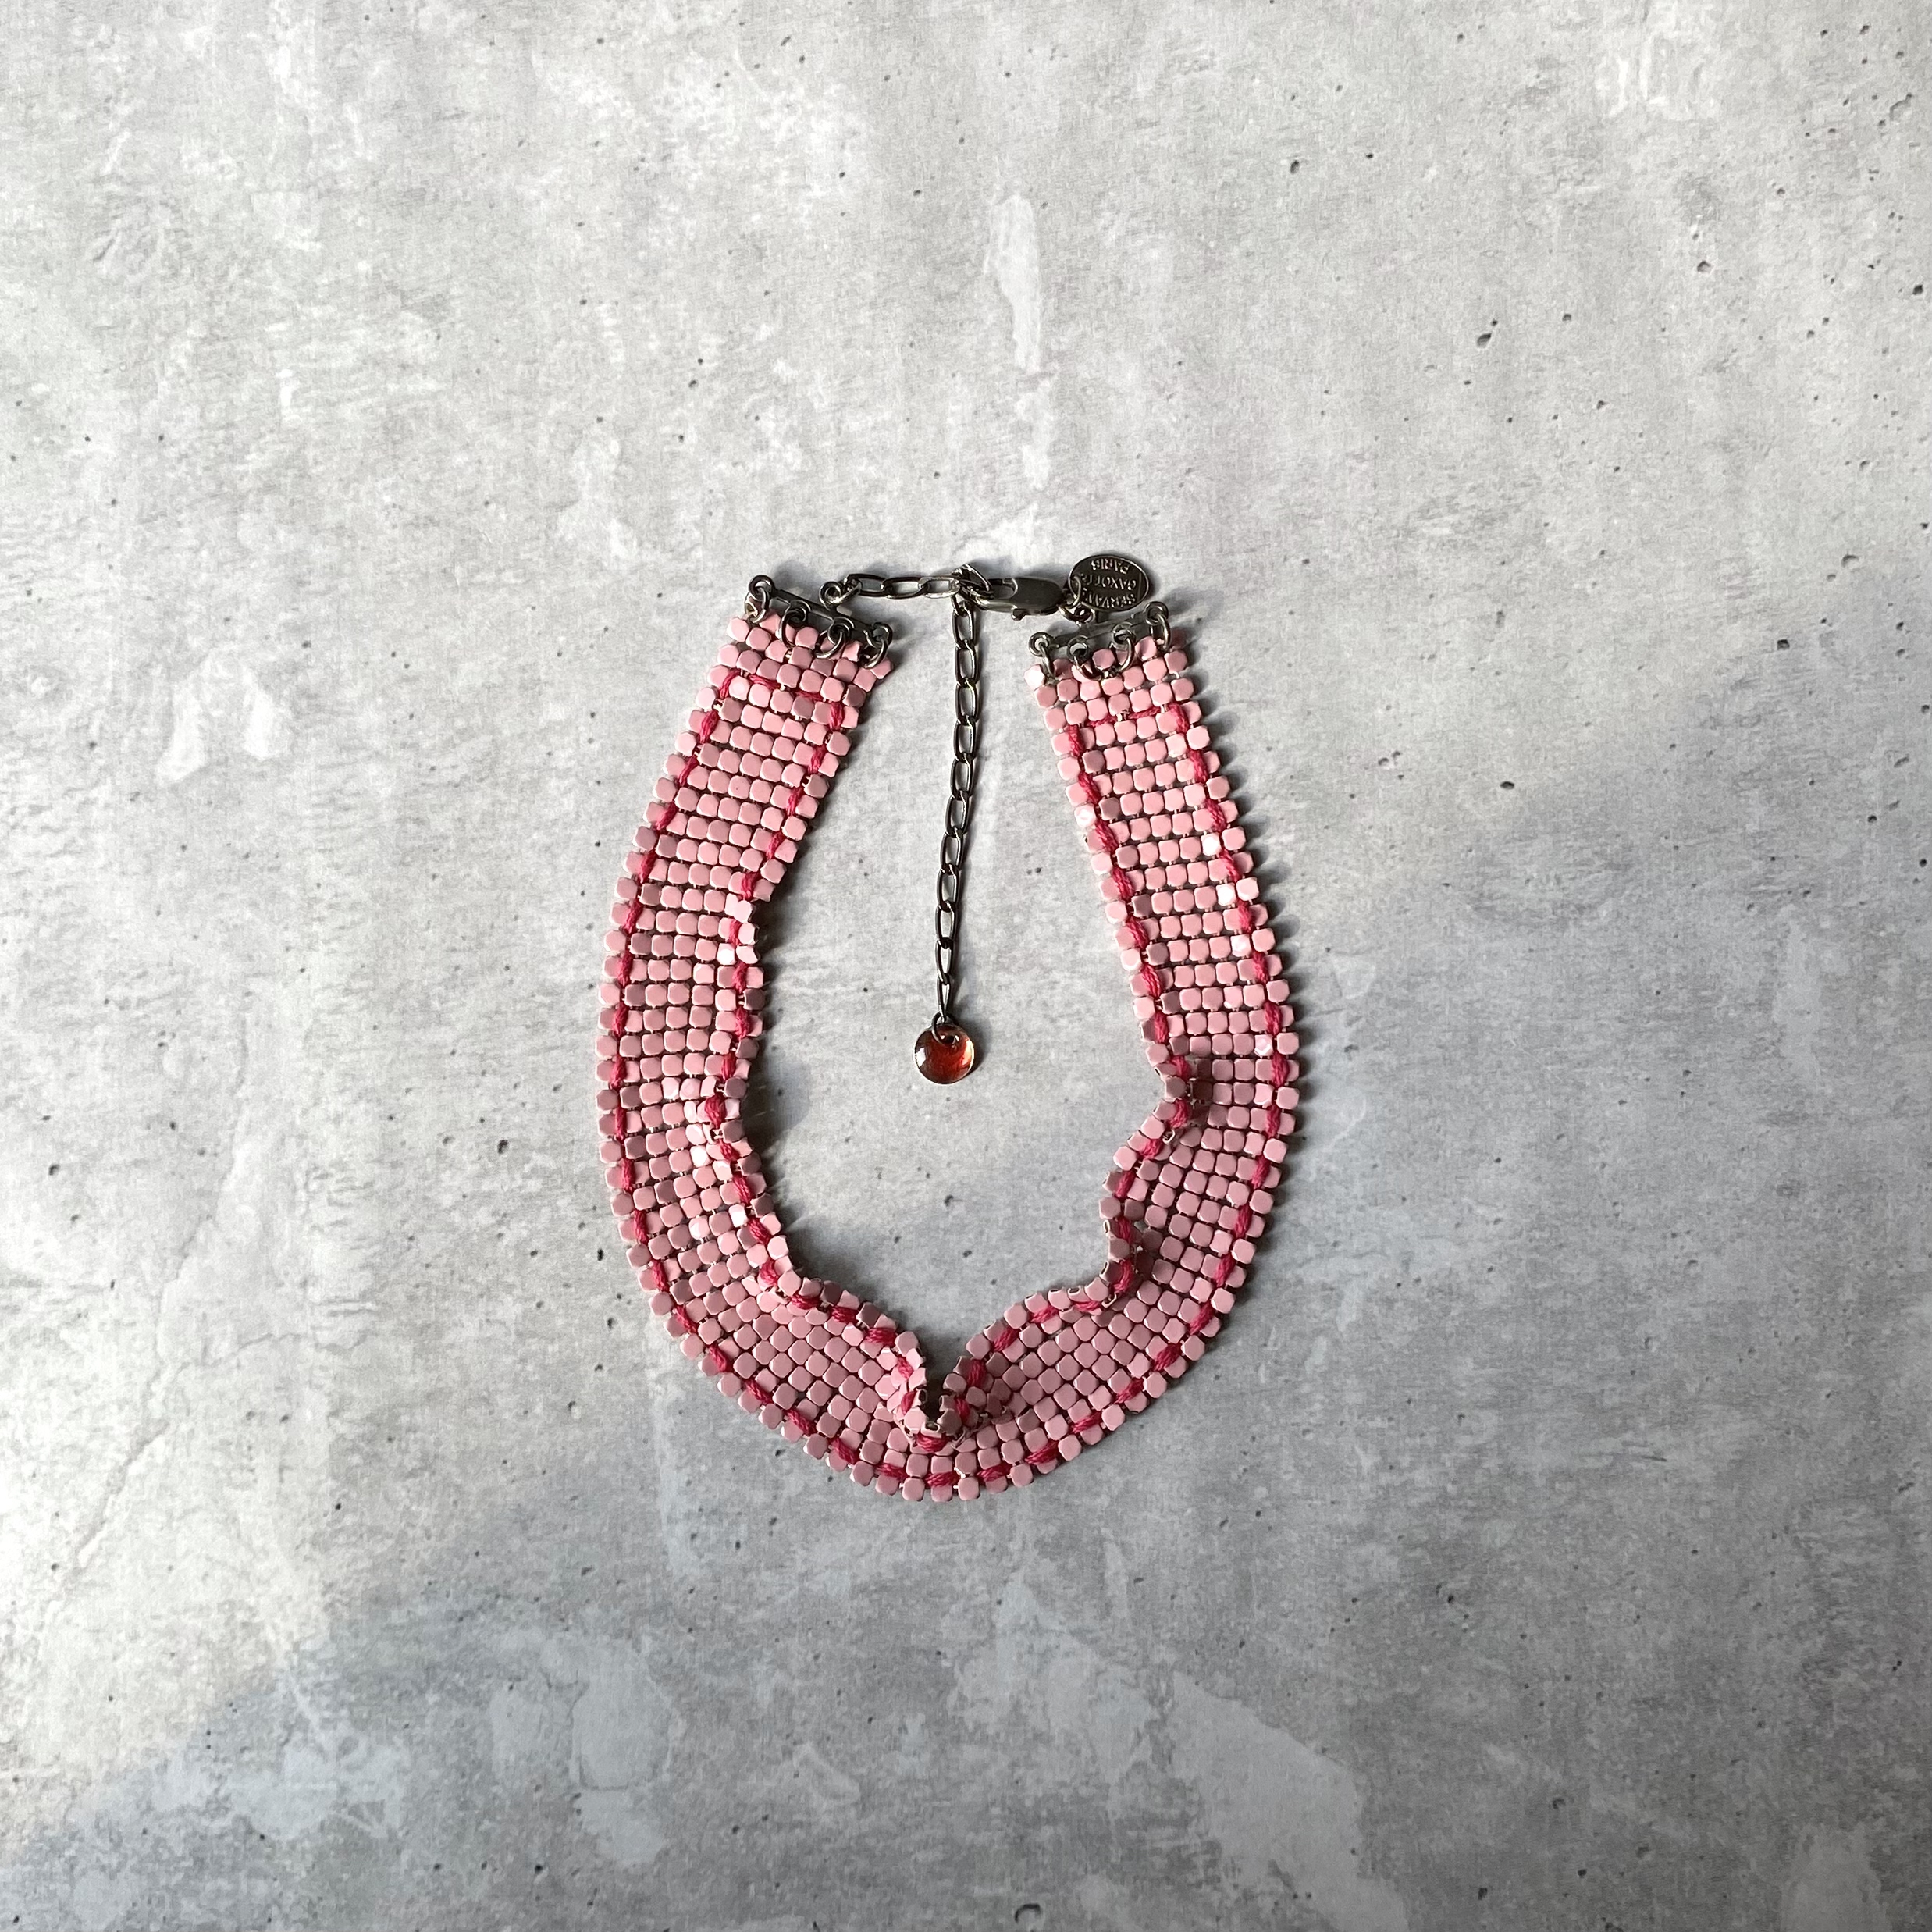 Used France pink metal mesh choker necklace レトロ ユーズド ピンク